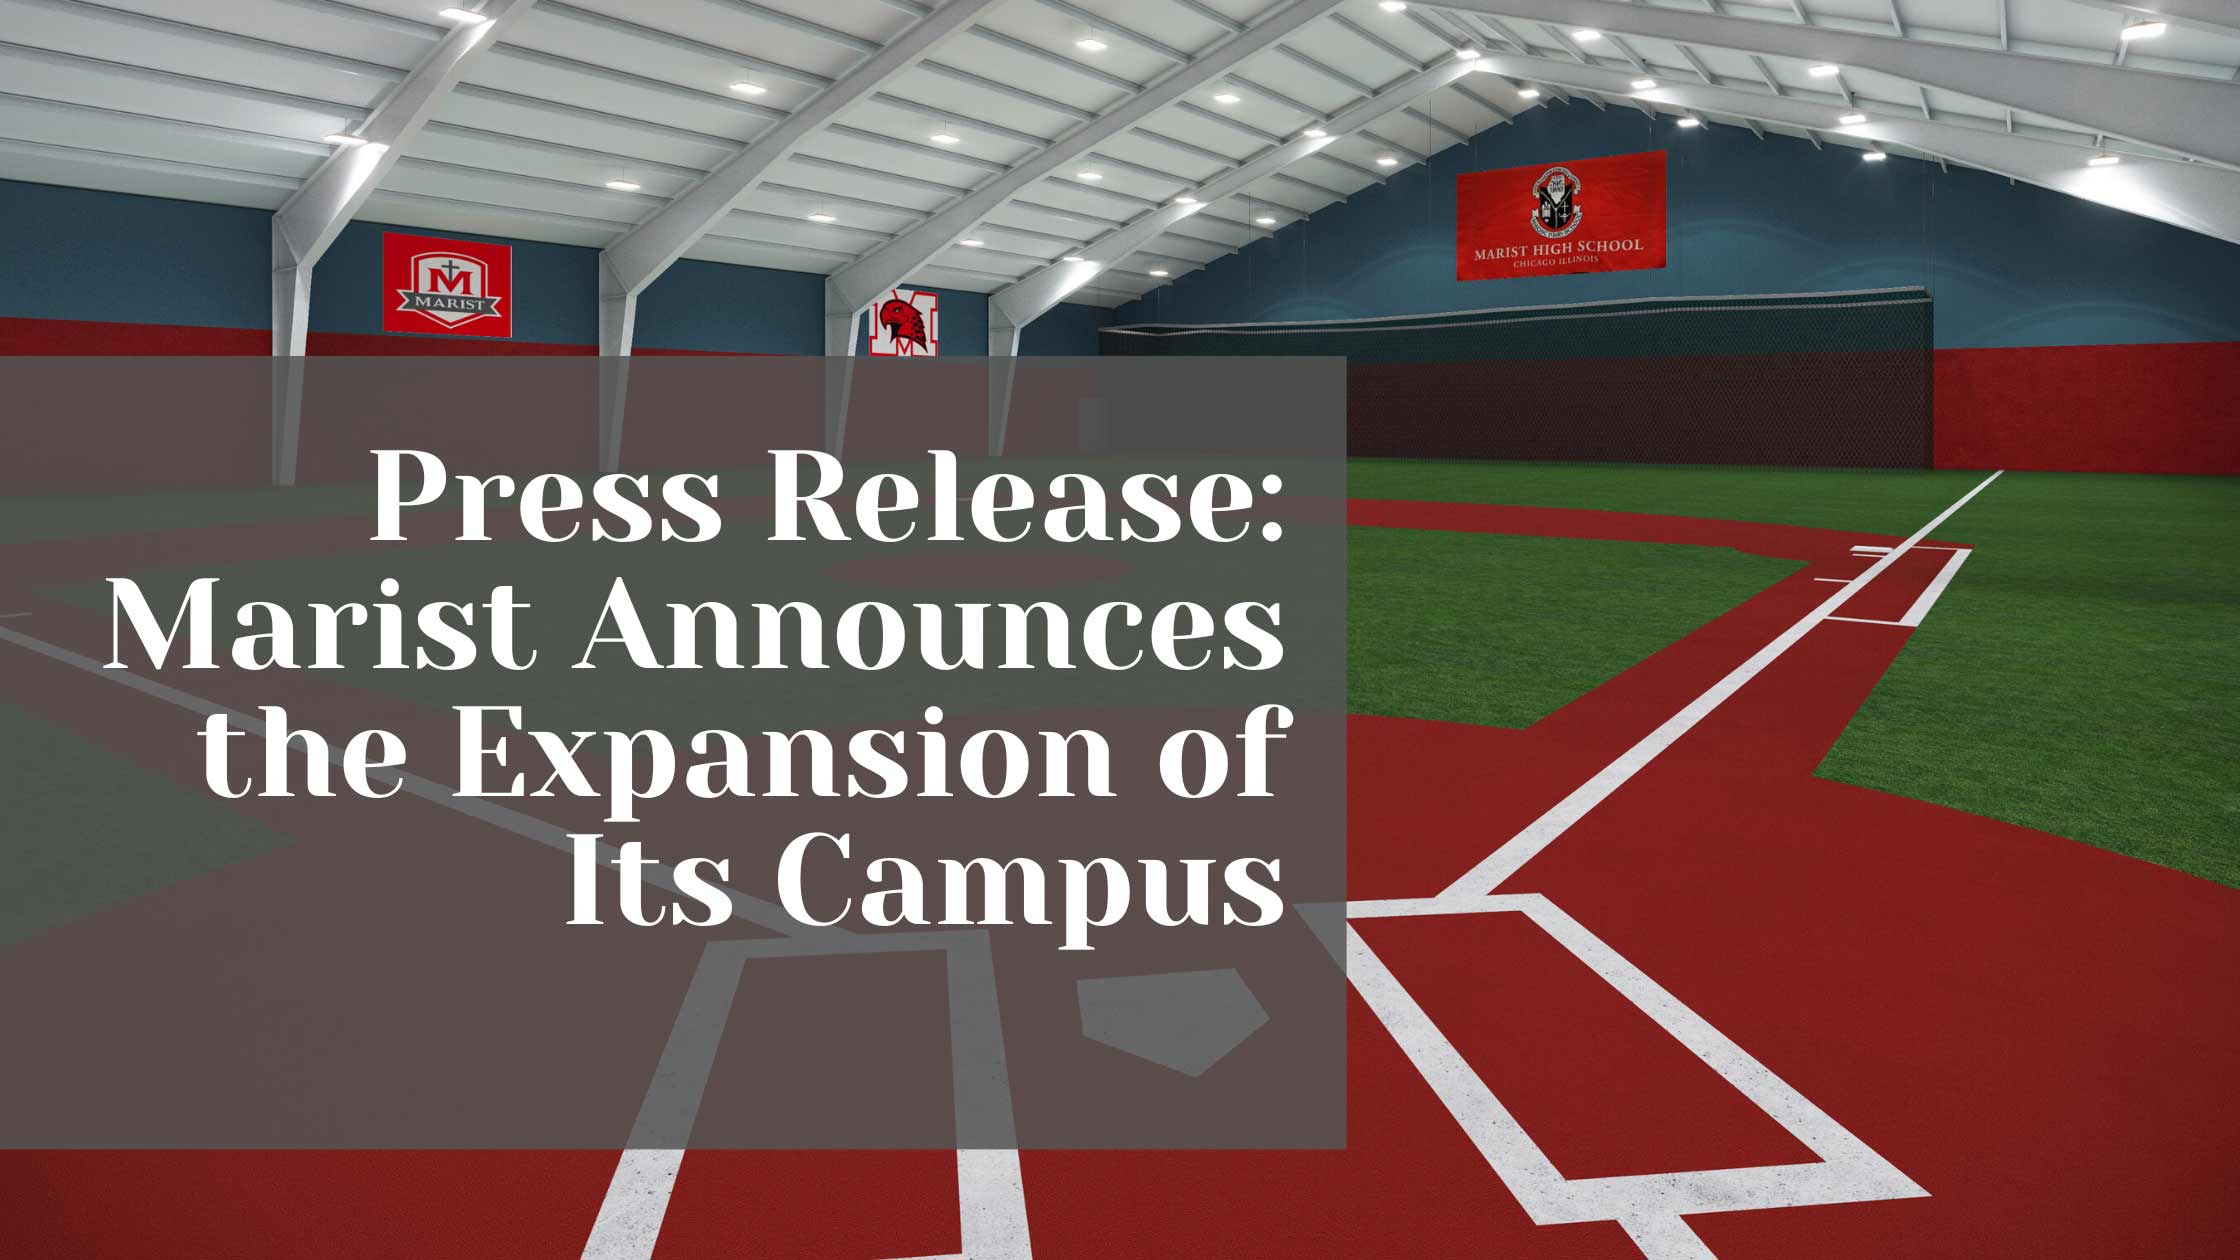 Press Release: Marist Announces the Expansion of Its Campus